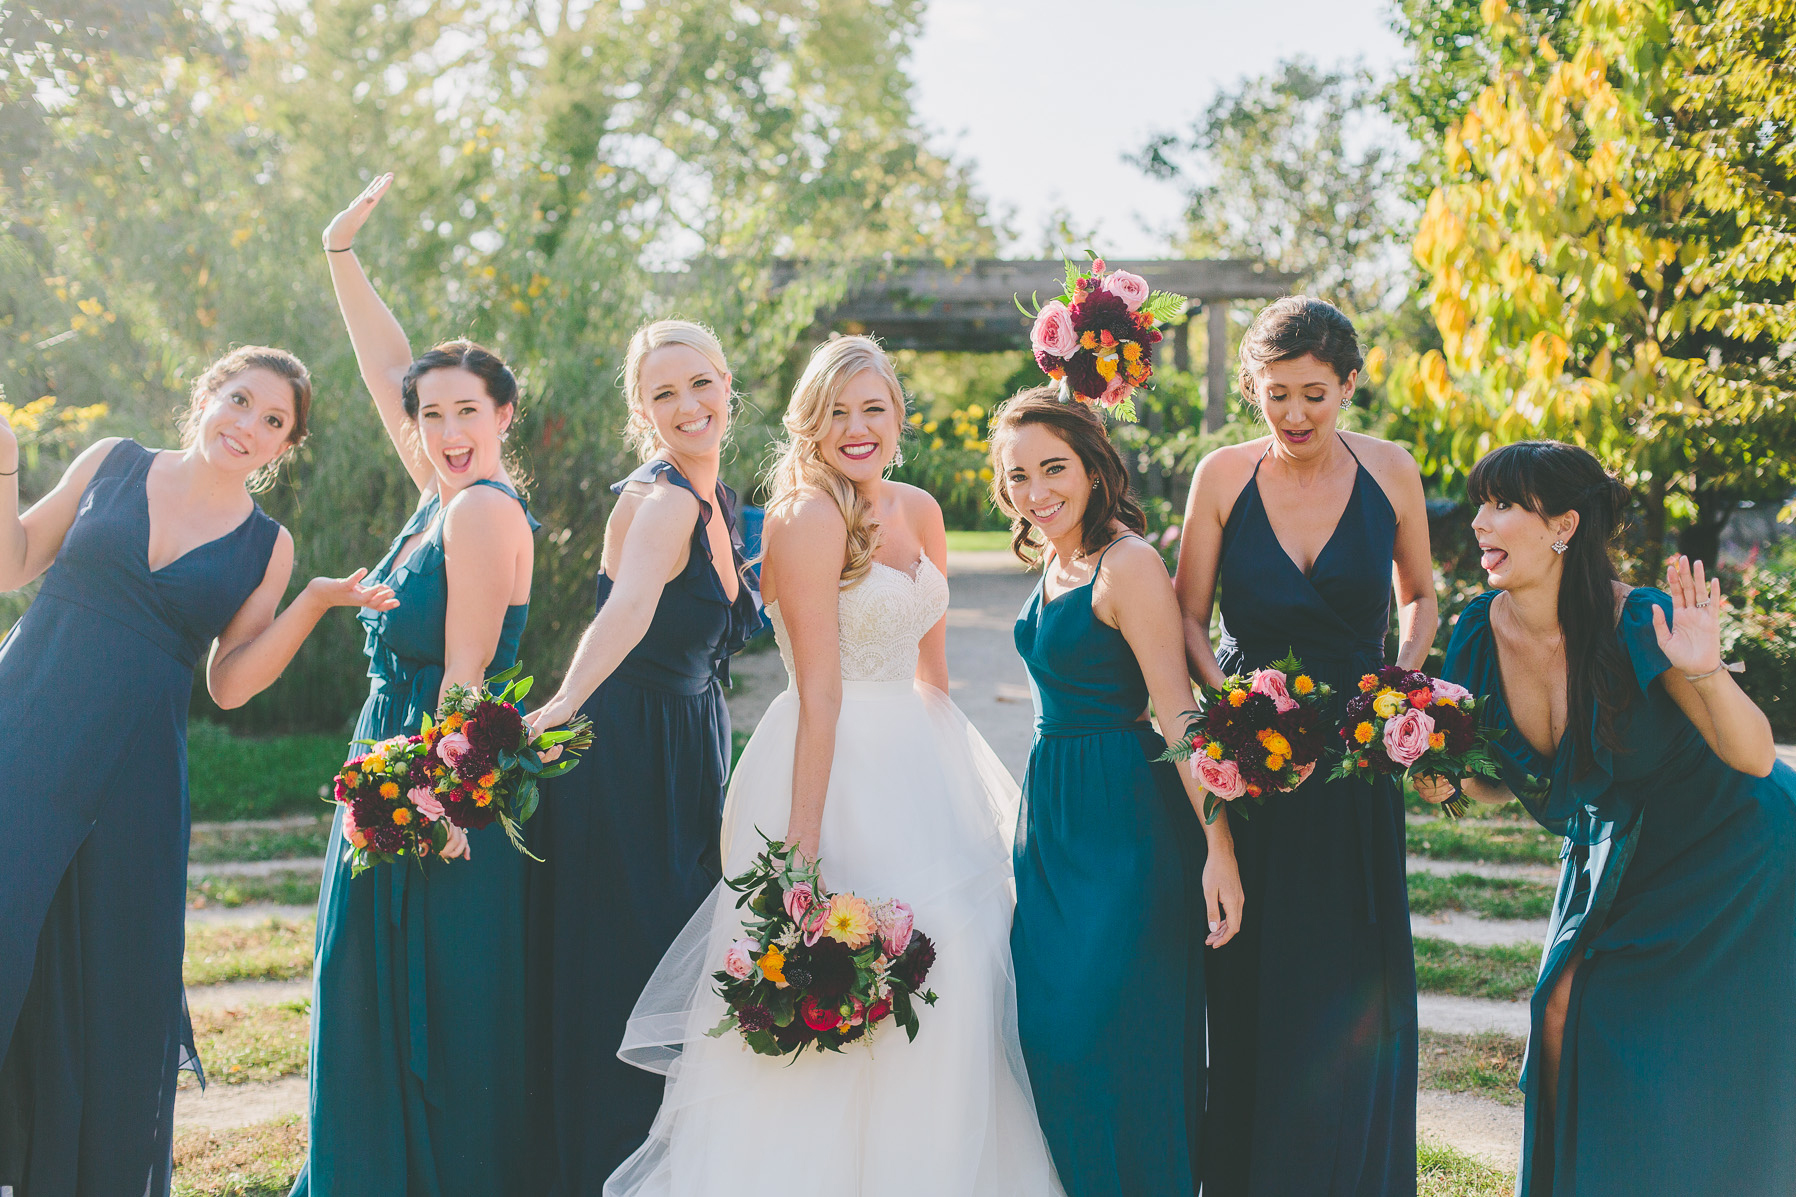 Fall wedding bridal party outside with teal dresses and bouquet with pink roses, plum scabiosa and dahlias, red and bright yellow ranunculus.